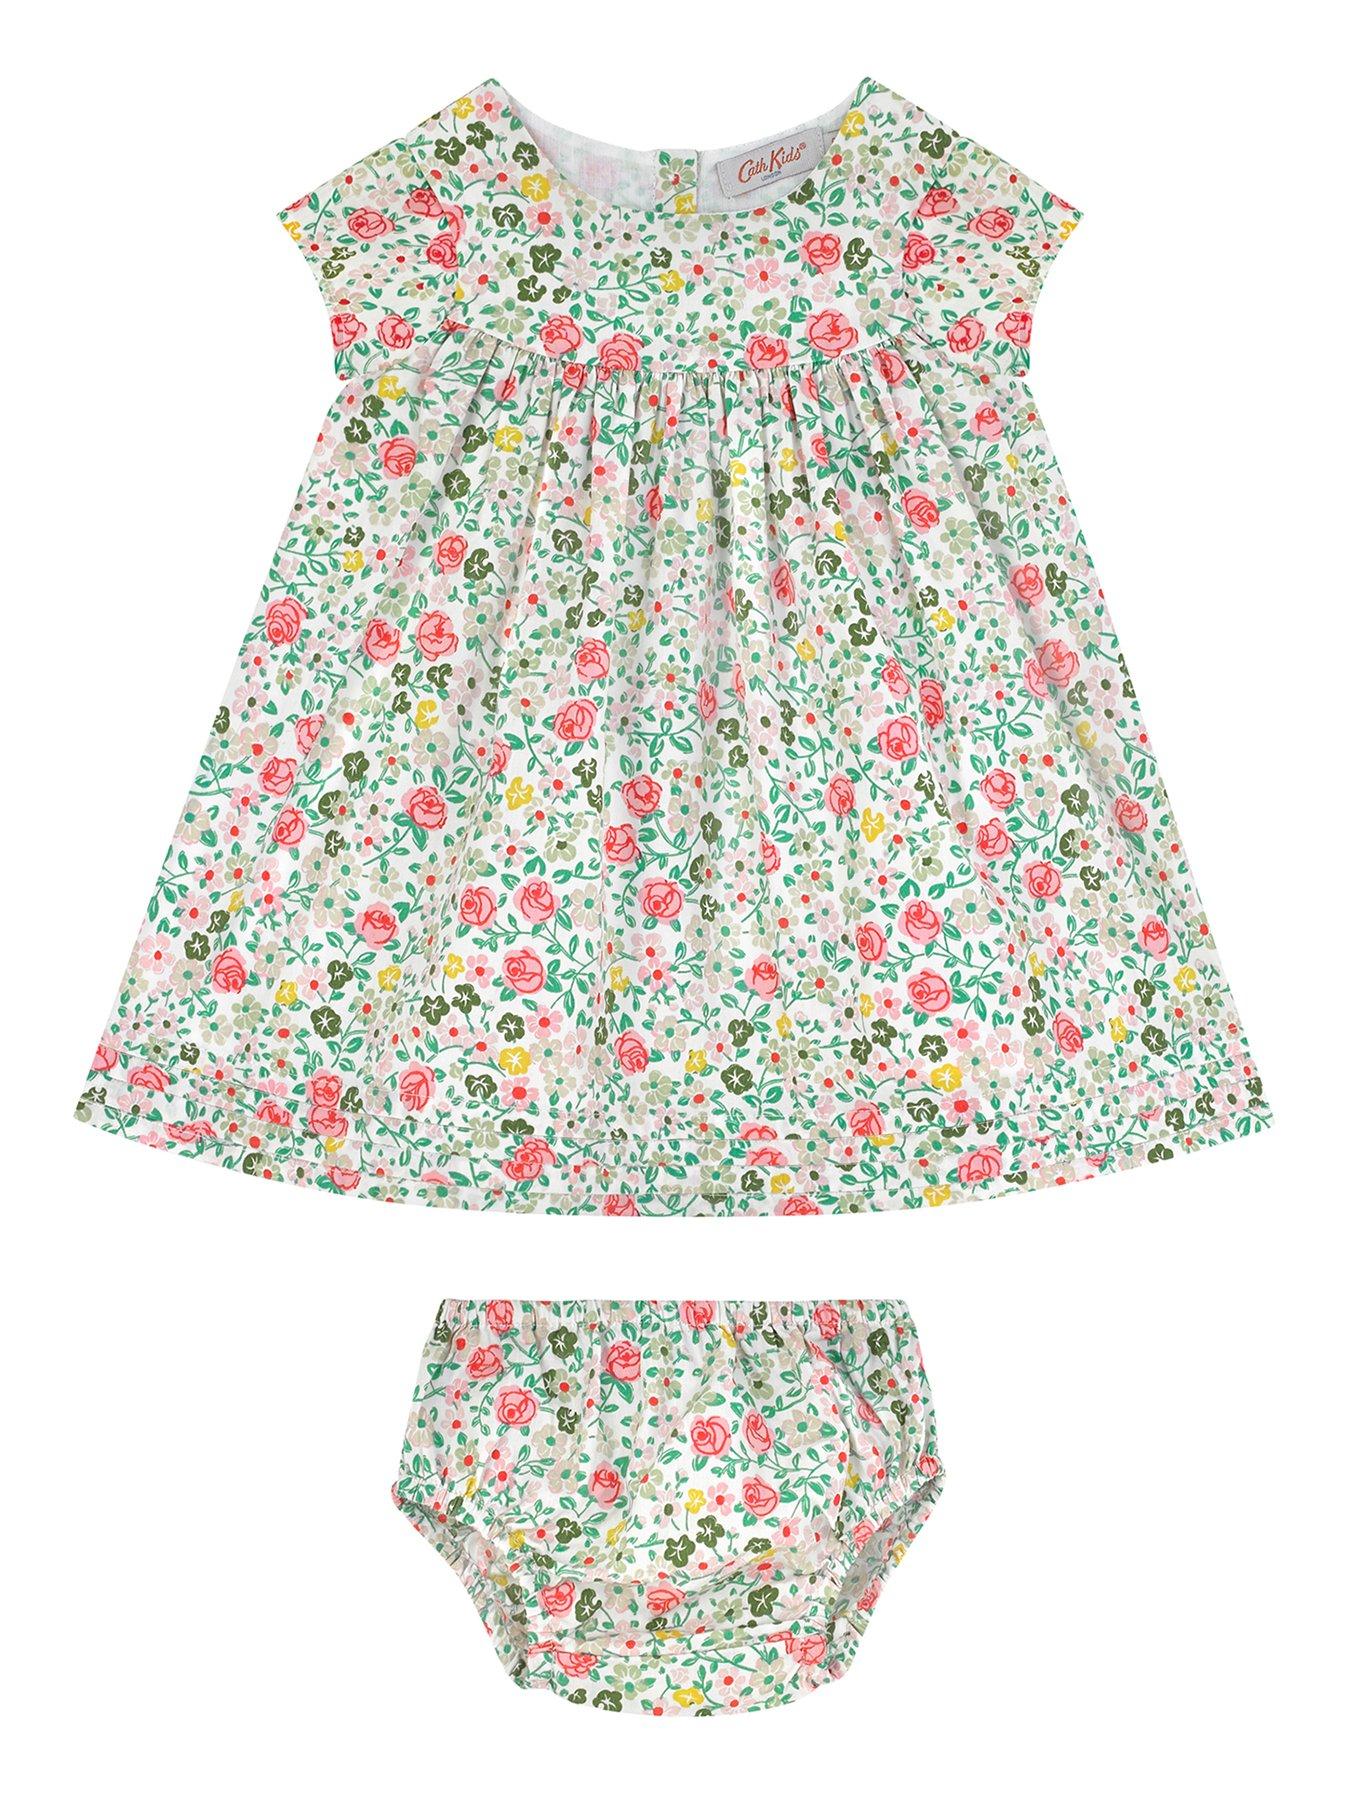 cath kidston baby girl clothes